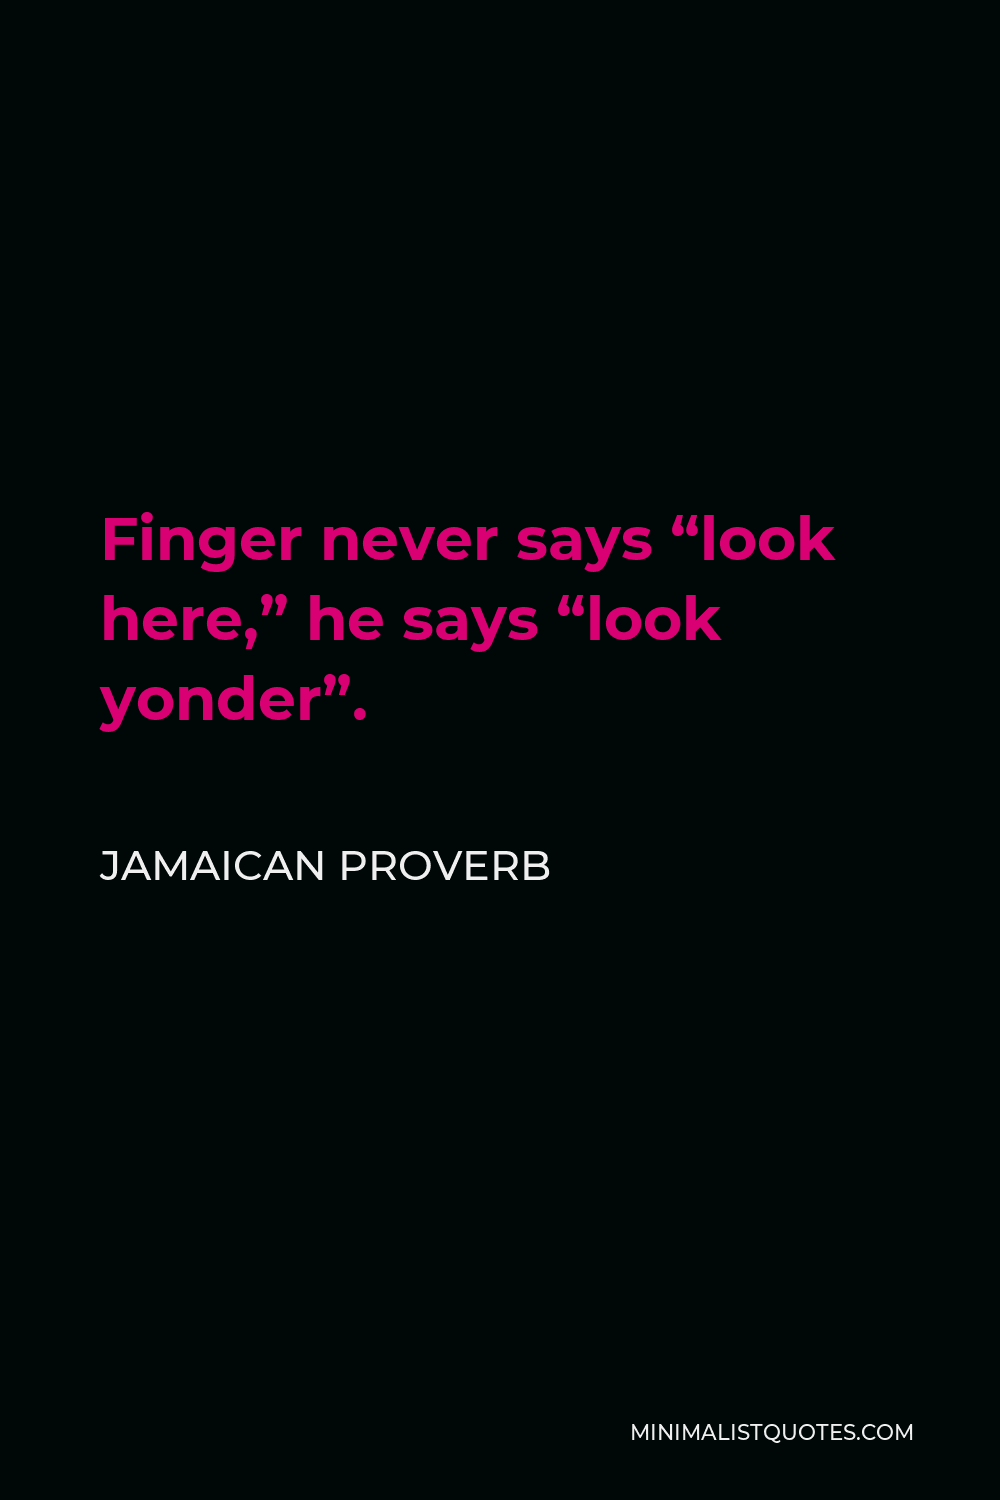 Jamaican Proverb Quote - Finger never says “look here,” he says “look yonder”.